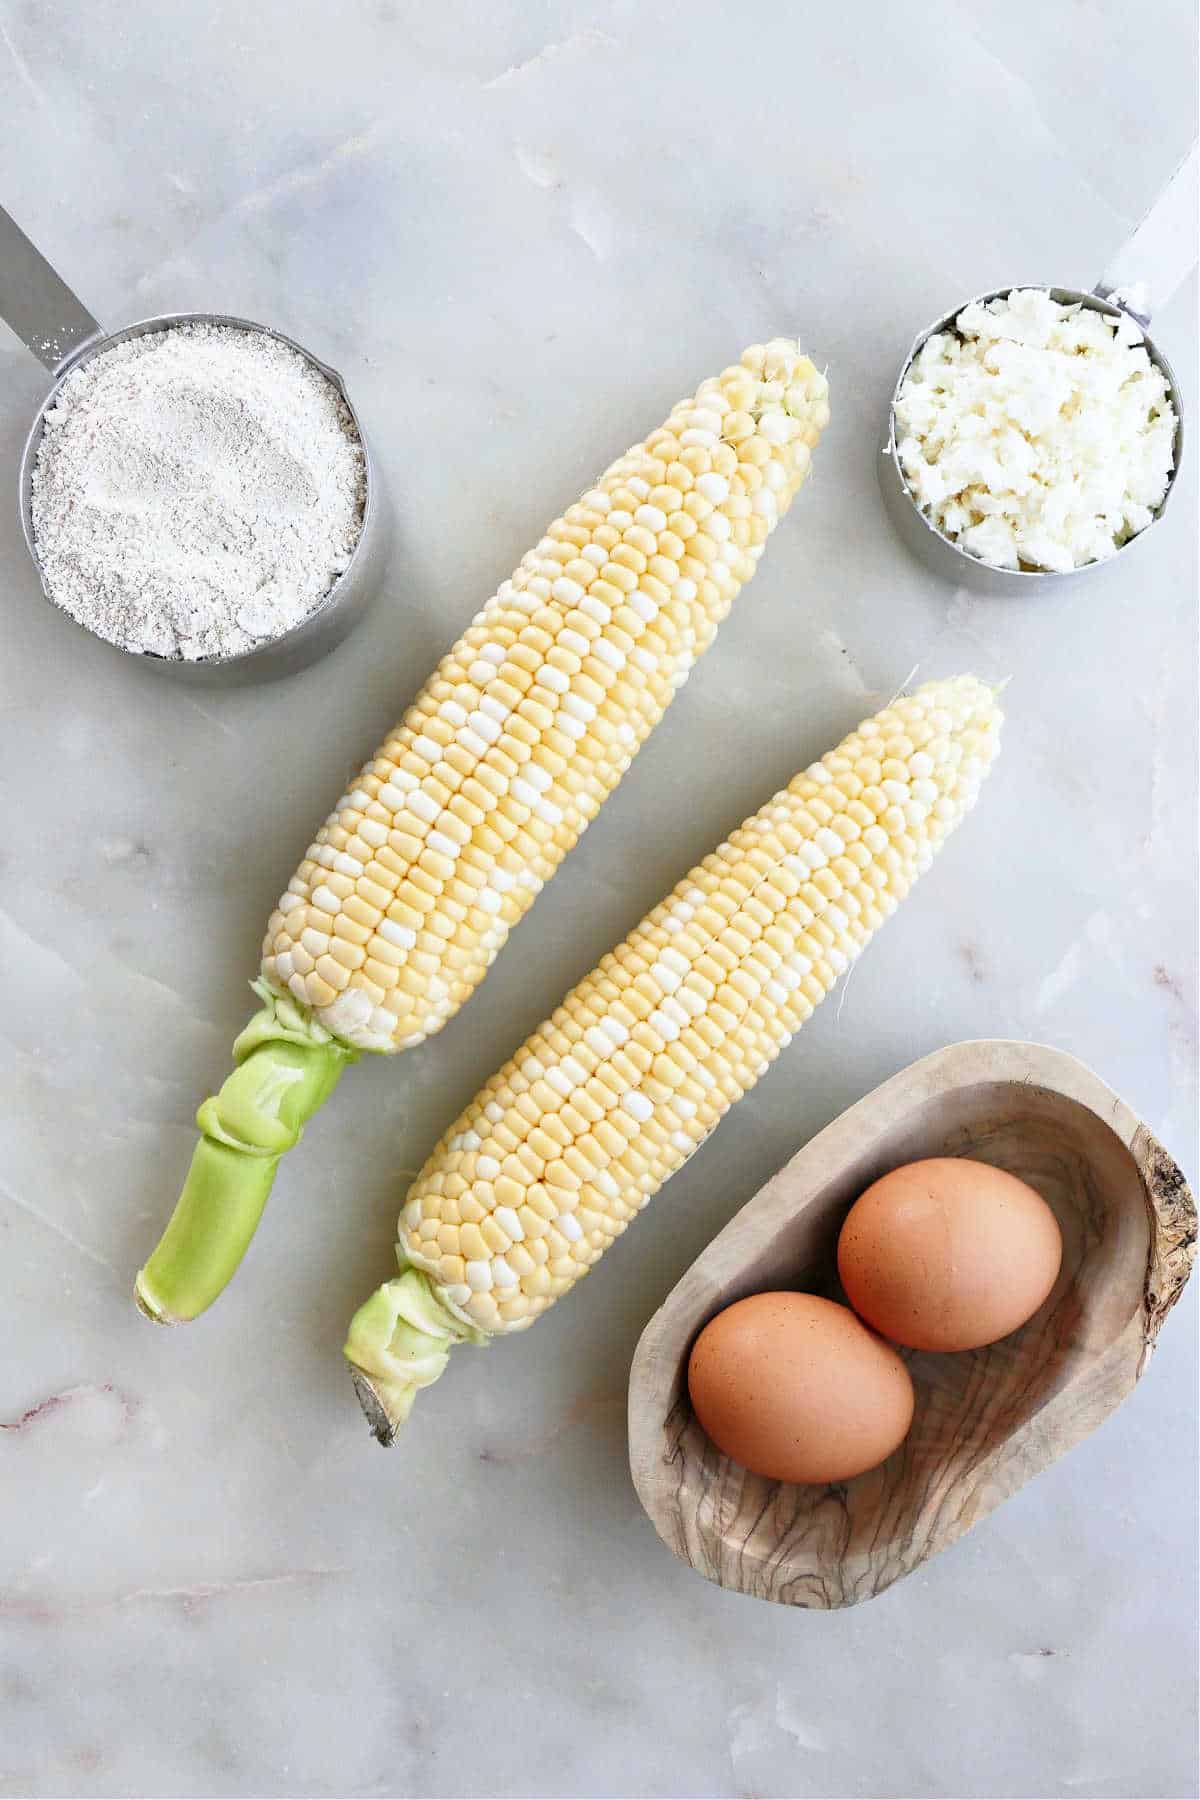 ground oats, corn on the cob, feta cheese, and eggs on a counter